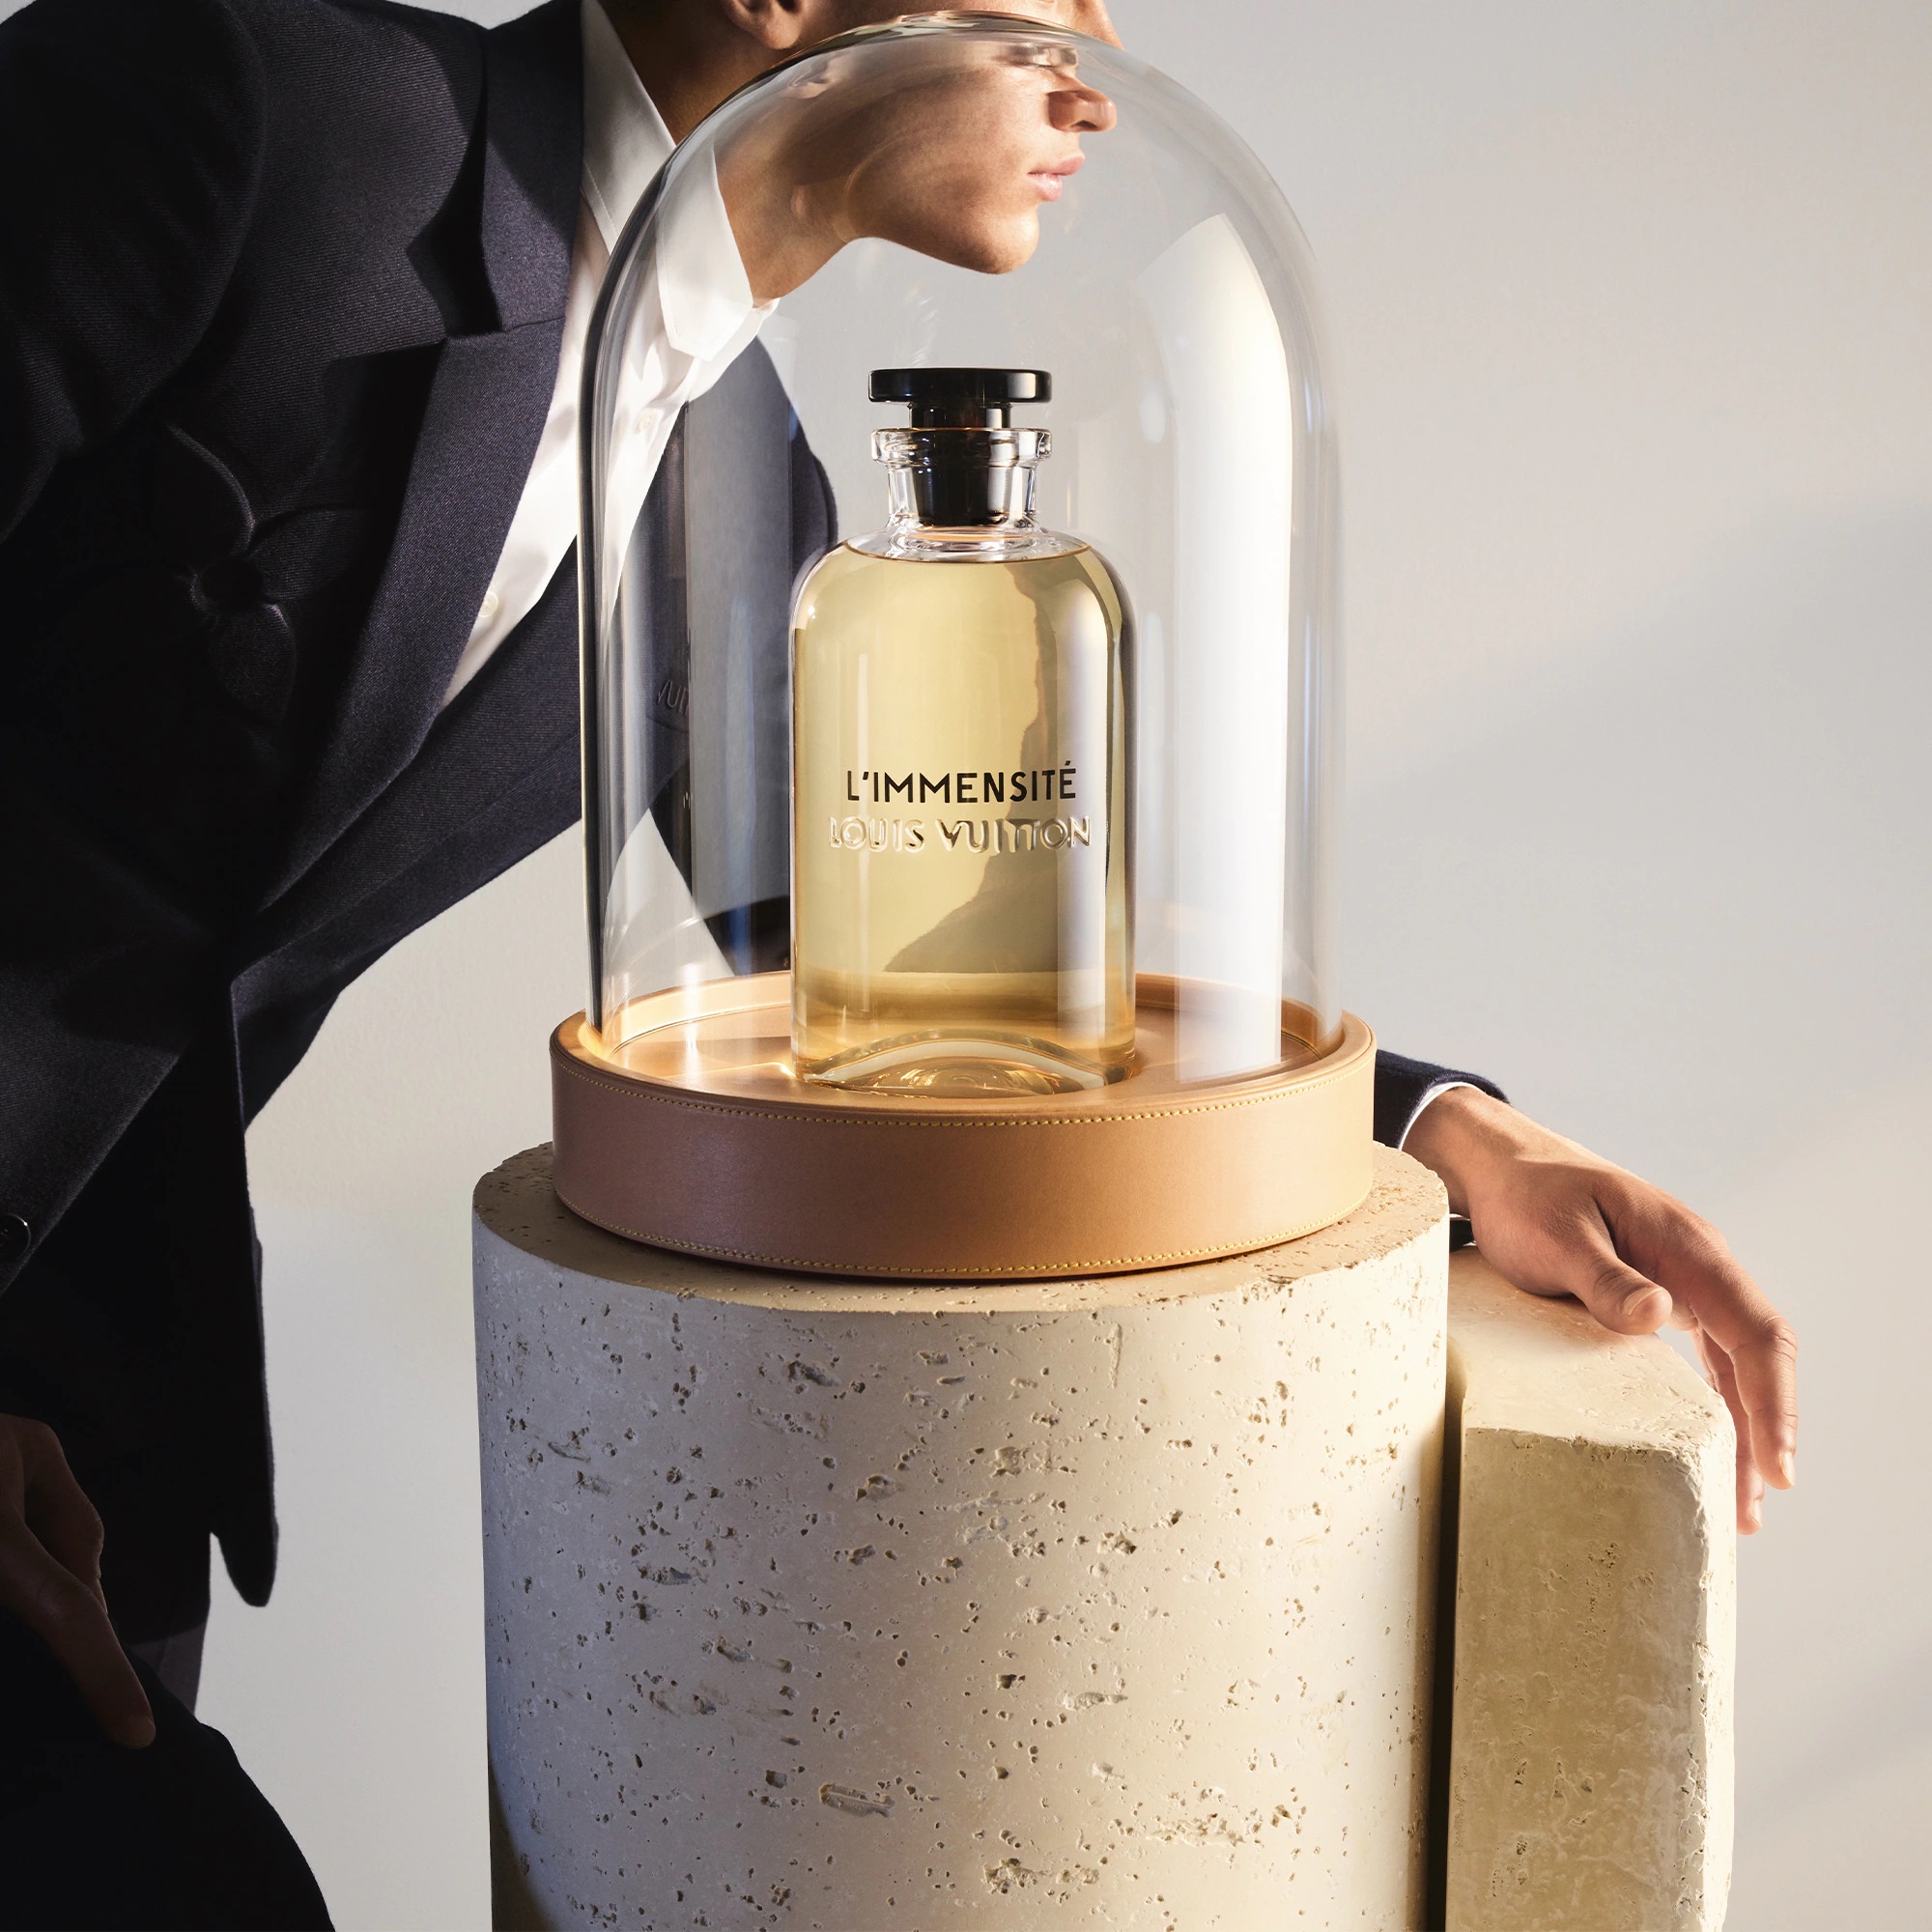 Louis Vuitton on X: Heures d'Absence: a suspension of time.  #LouisVuitton's new fragrance takes its name from the Maison's very first  perfume launched almost a century ago. See the campaign with #EmmaStone